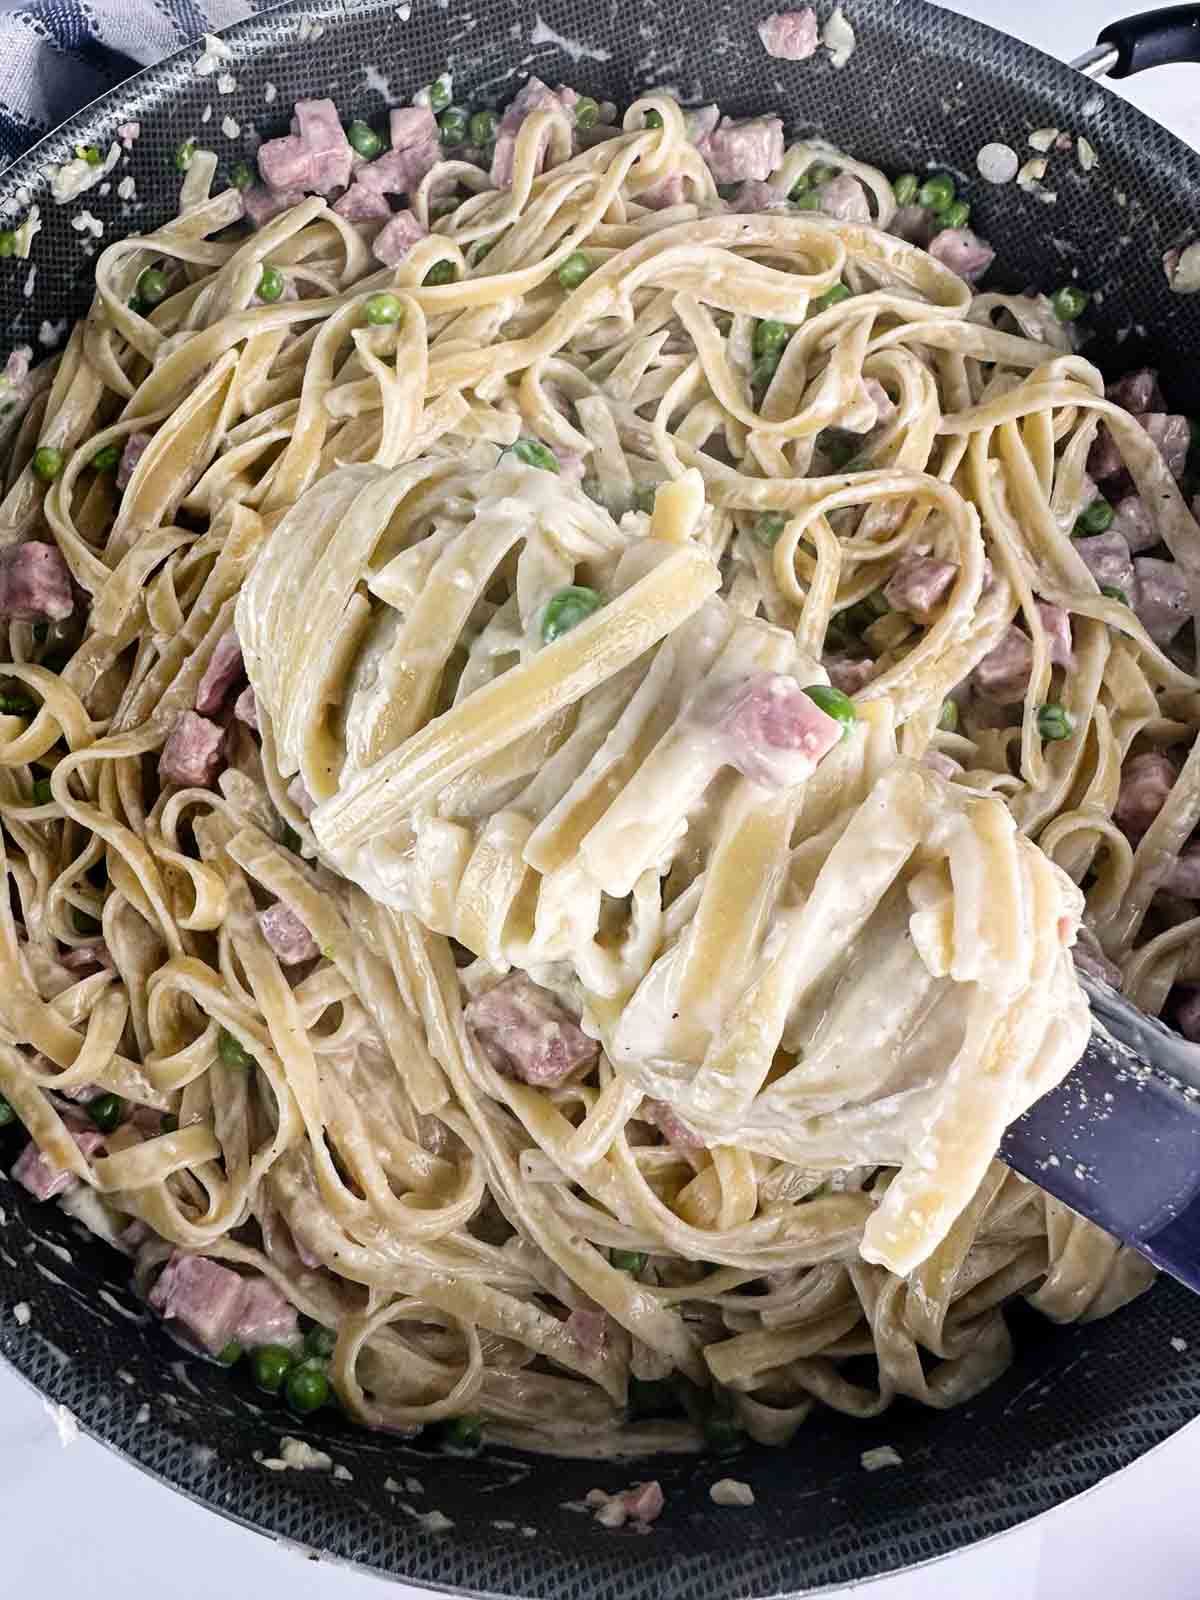 Pasta with ham and peas being twirled with tongs before serving